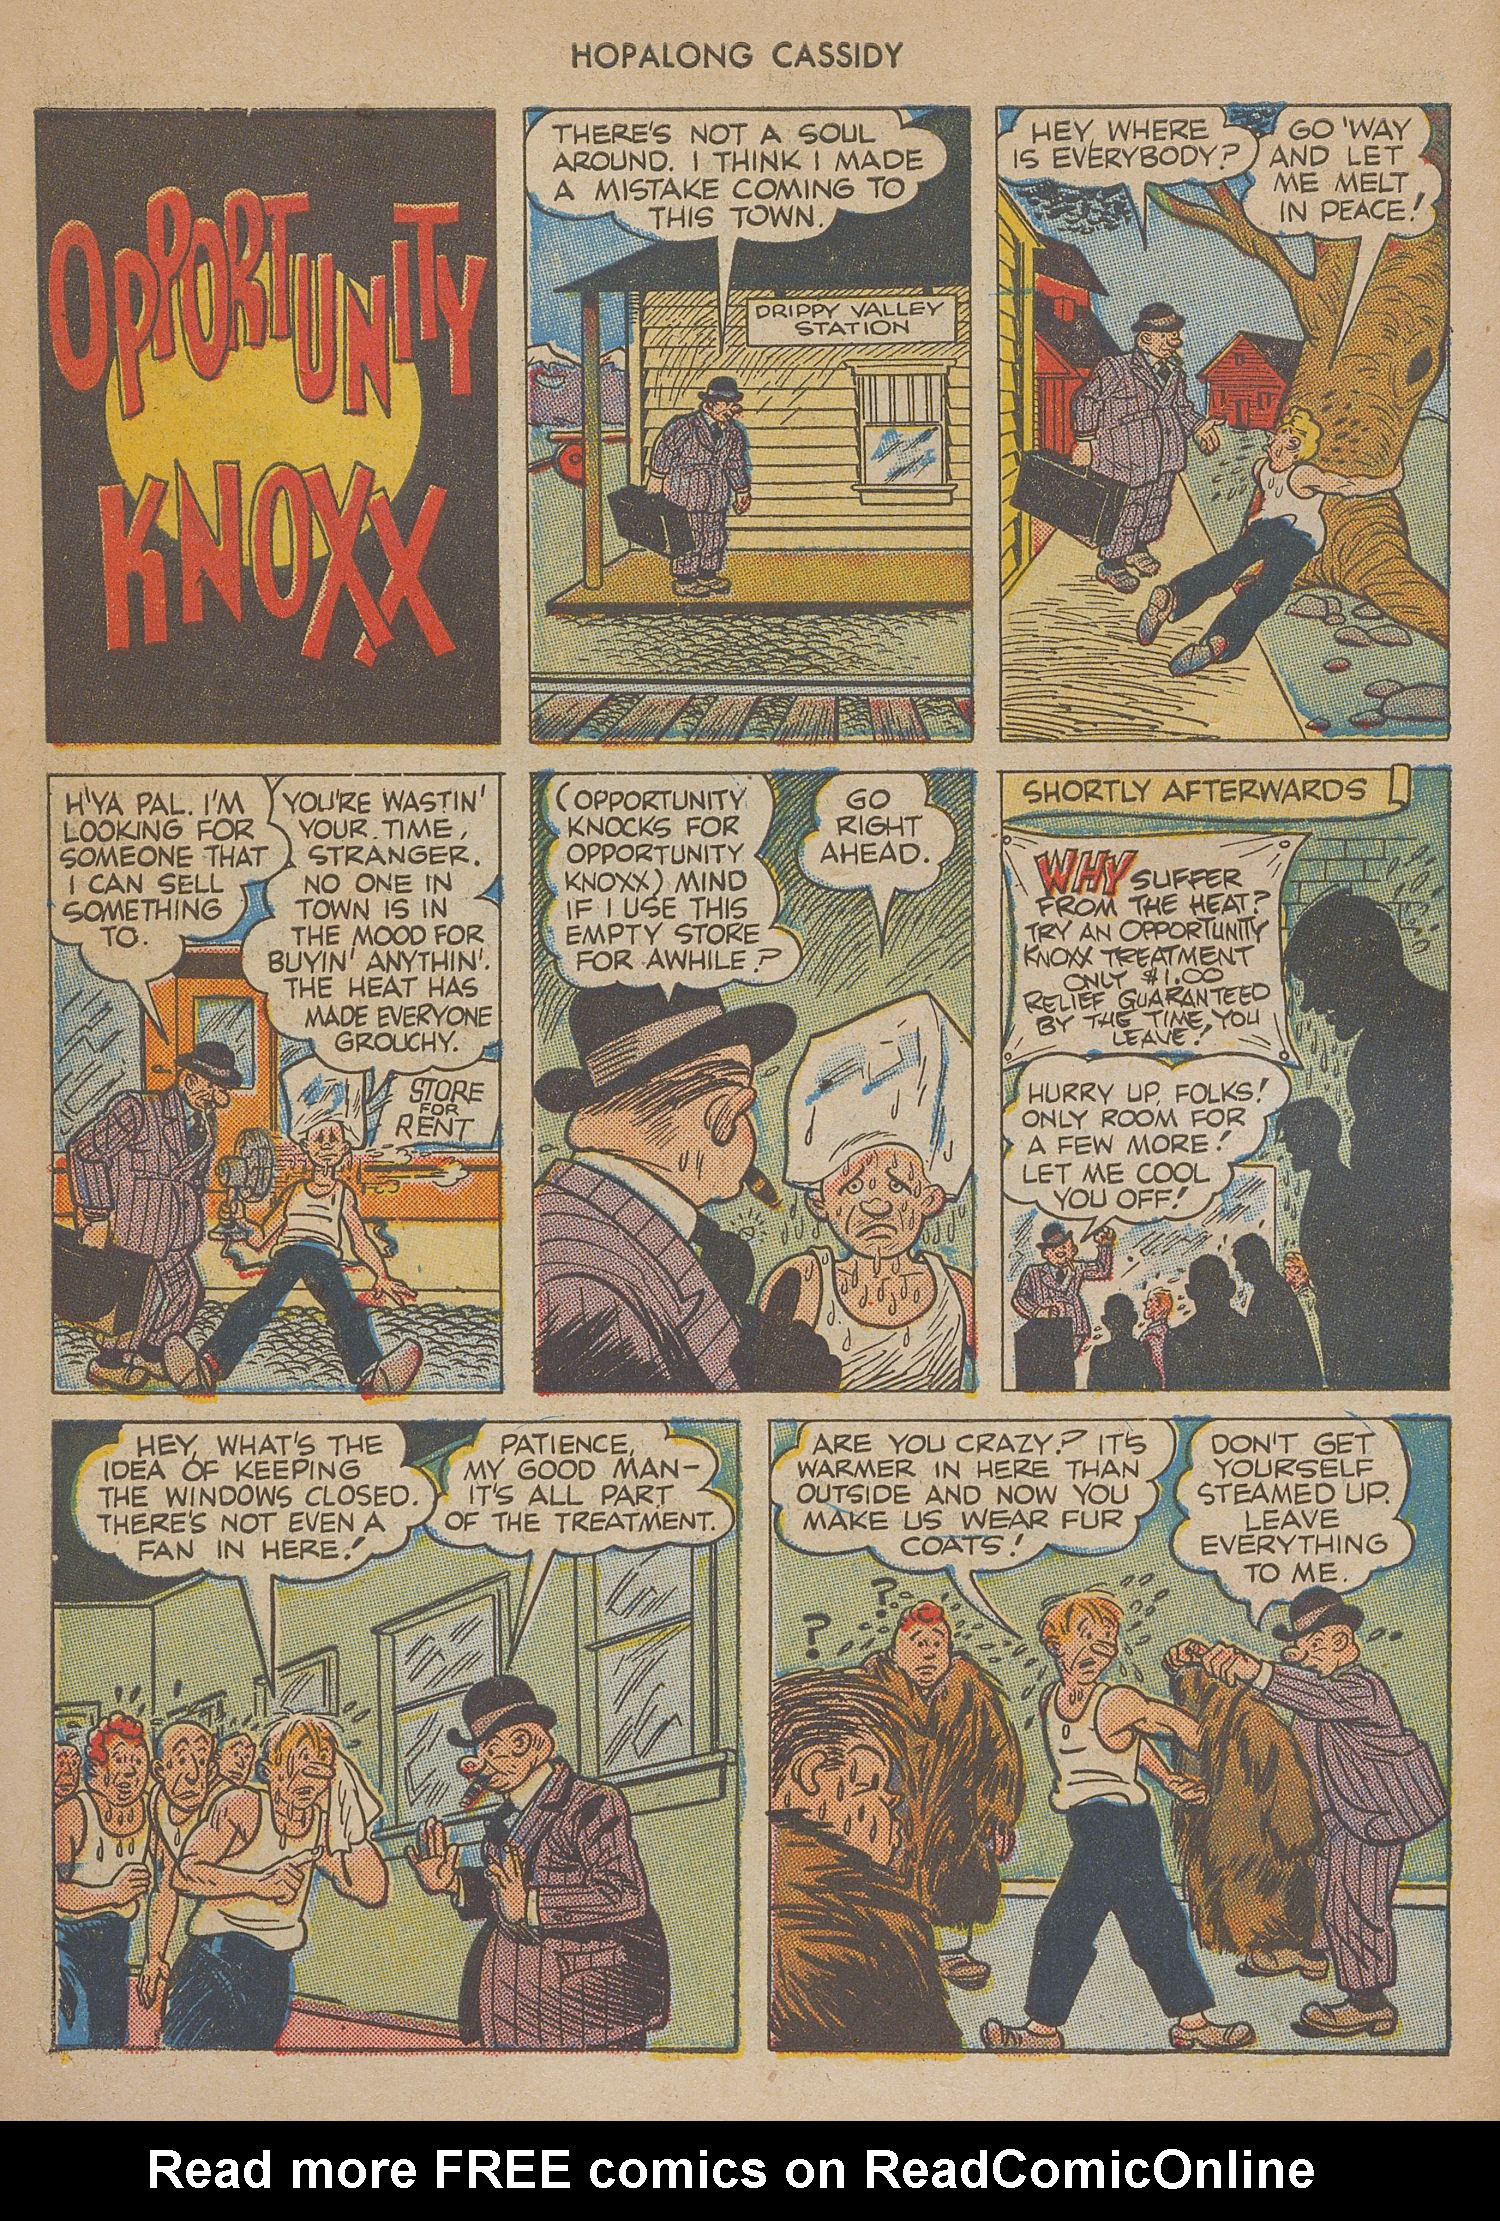 Read online Hopalong Cassidy comic -  Issue #2 - 10